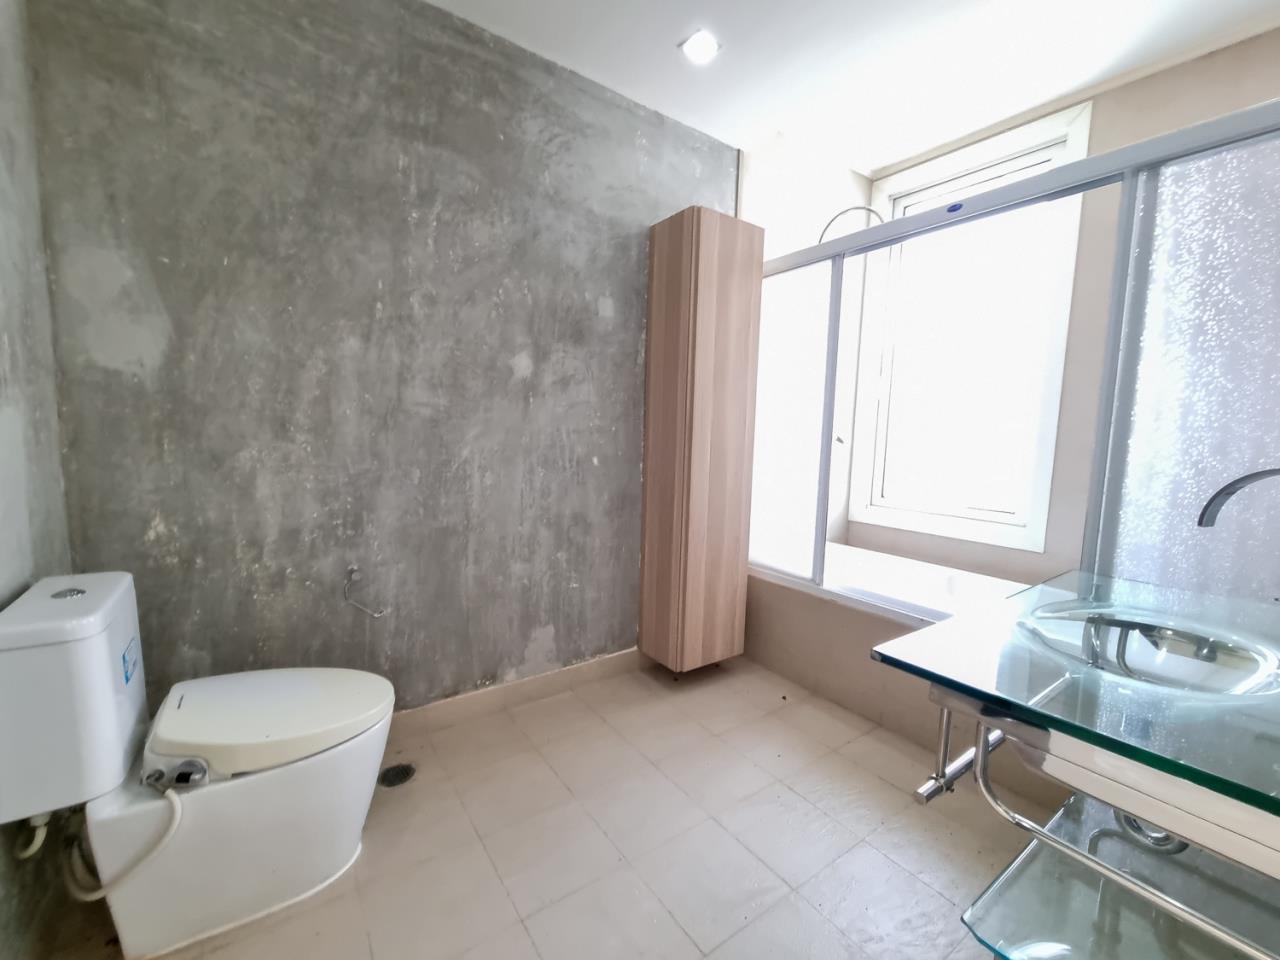 Japanthai Property Agency's *Siri Residence* Huge terrace rare 110sqm 2bed in Phrom Phong area  (5 mins walk to BTS PhromPhong)* 15